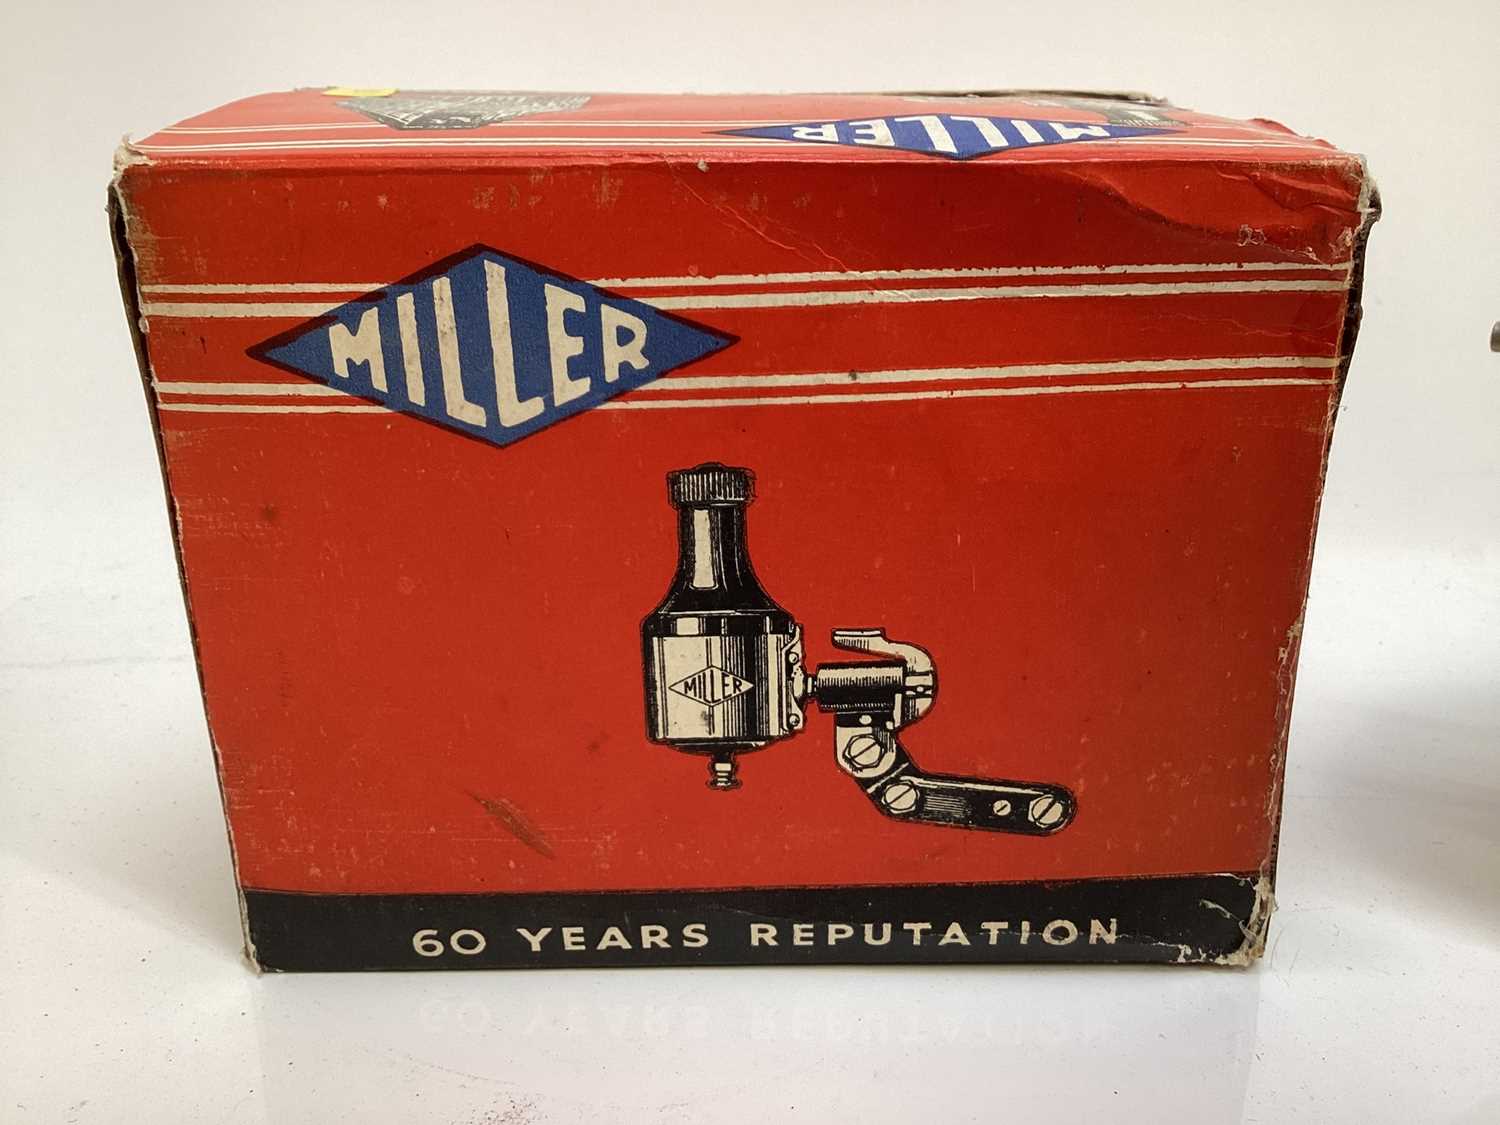 Vintage Miller cycle lamp and generator in original box - new old stock - Image 5 of 12